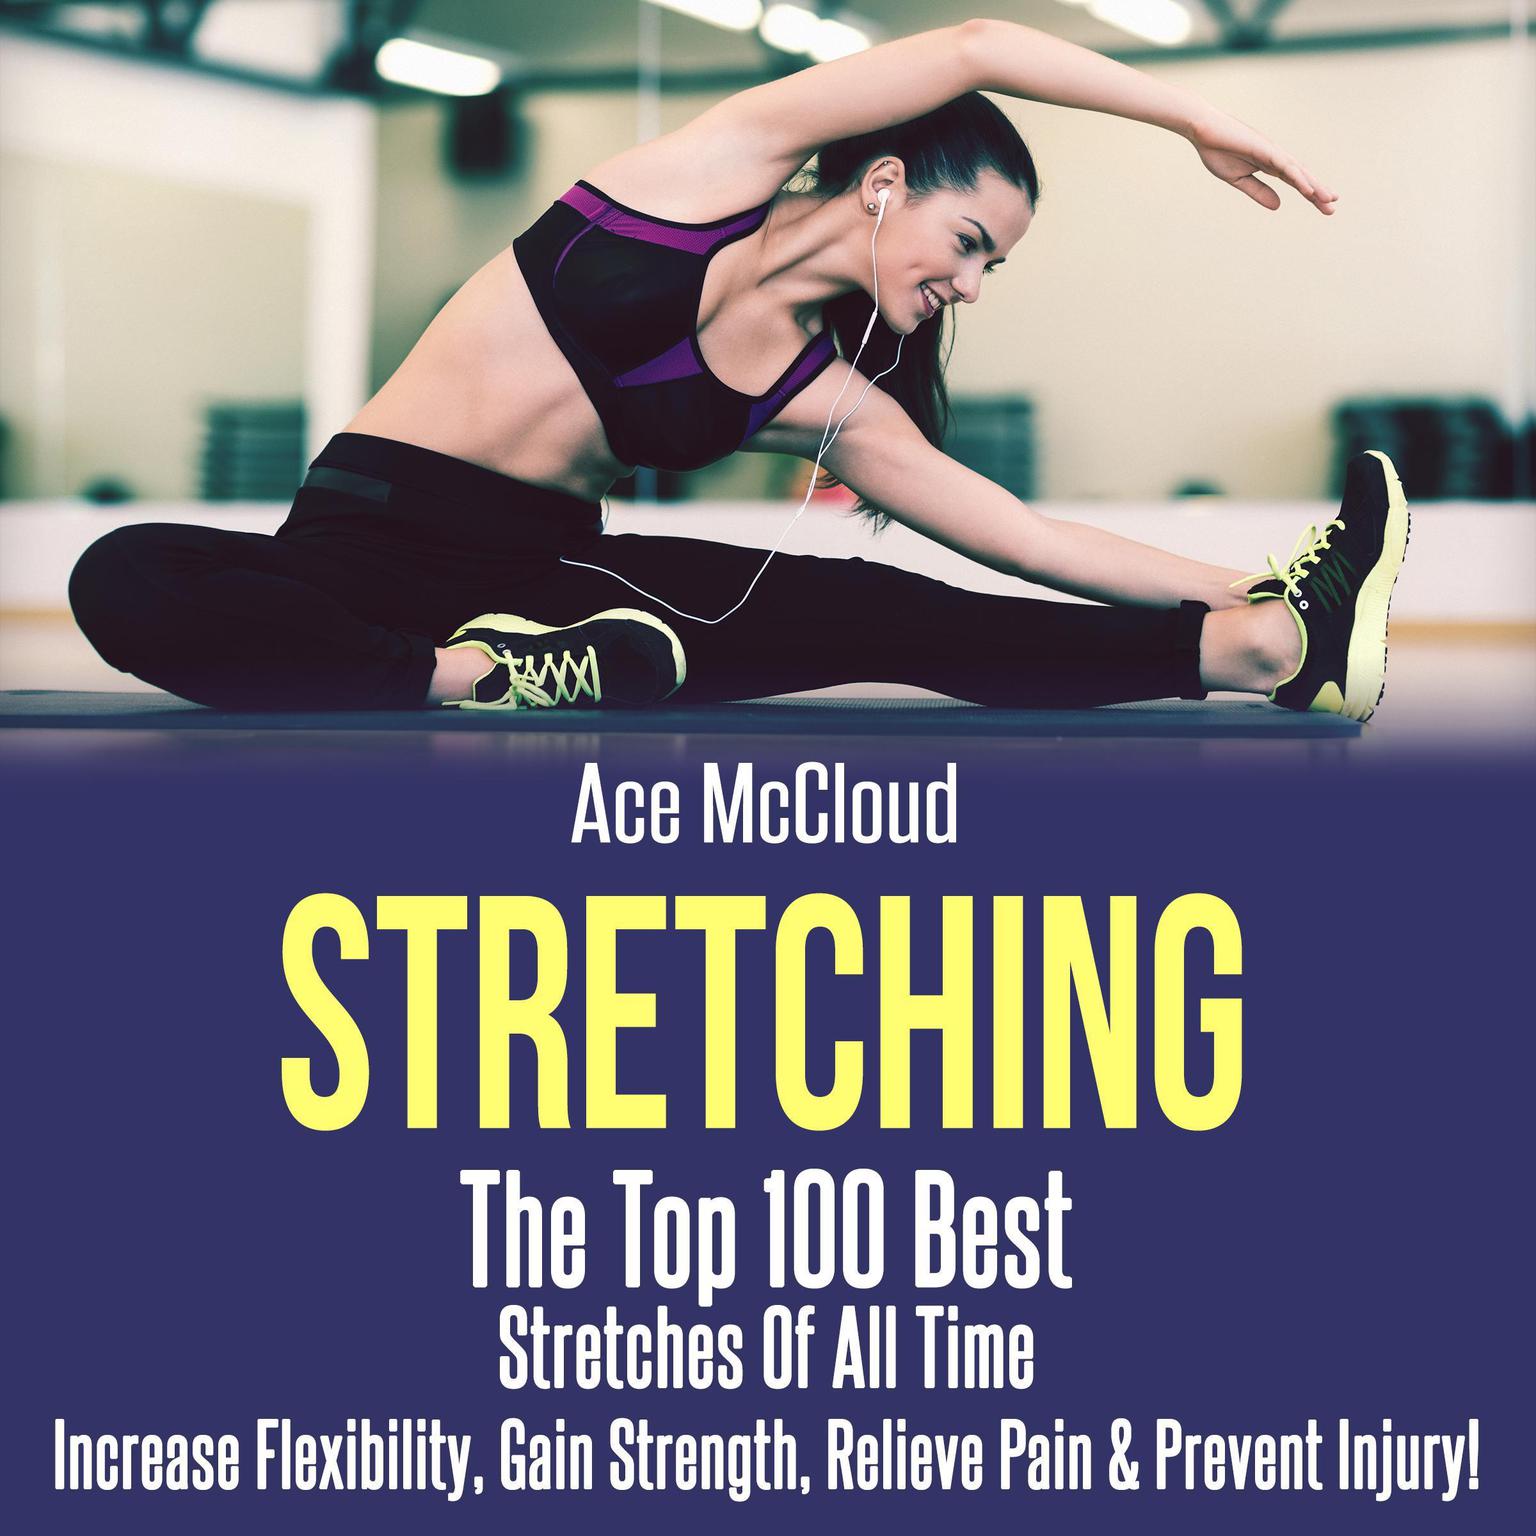 Stretching: The Top 100 Best Stretches Of All Time: Increase Flexibility, Gain Strength, Relieve Pain & Prevent Injury Audiobook, by Ace McCloud